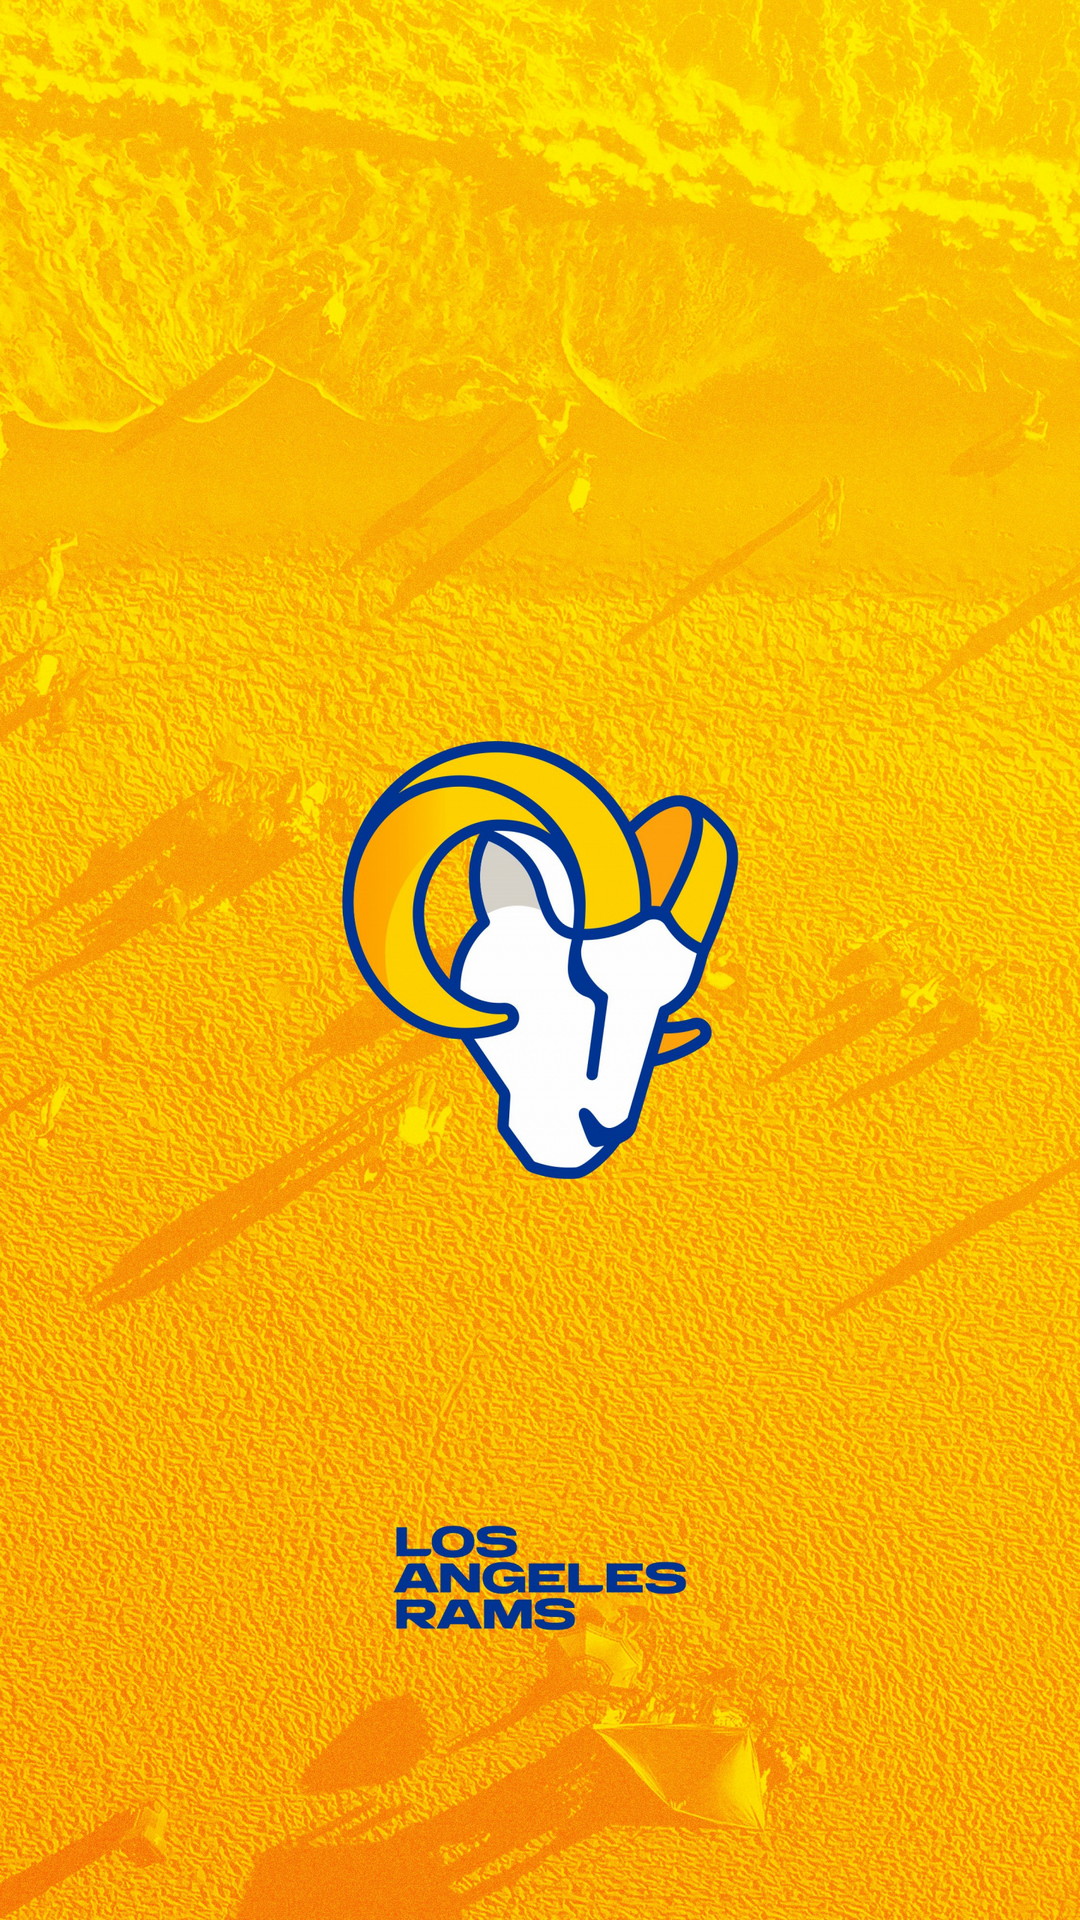 Wallpaper Mobile Los Angeles Rams with high-resolution 1080x1920 pixel. You can use and set as wallpaper for Notebook Screensavers, Mac Wallpapers, Mobile Home Screen, iPhone or Android Phones Lock Screen